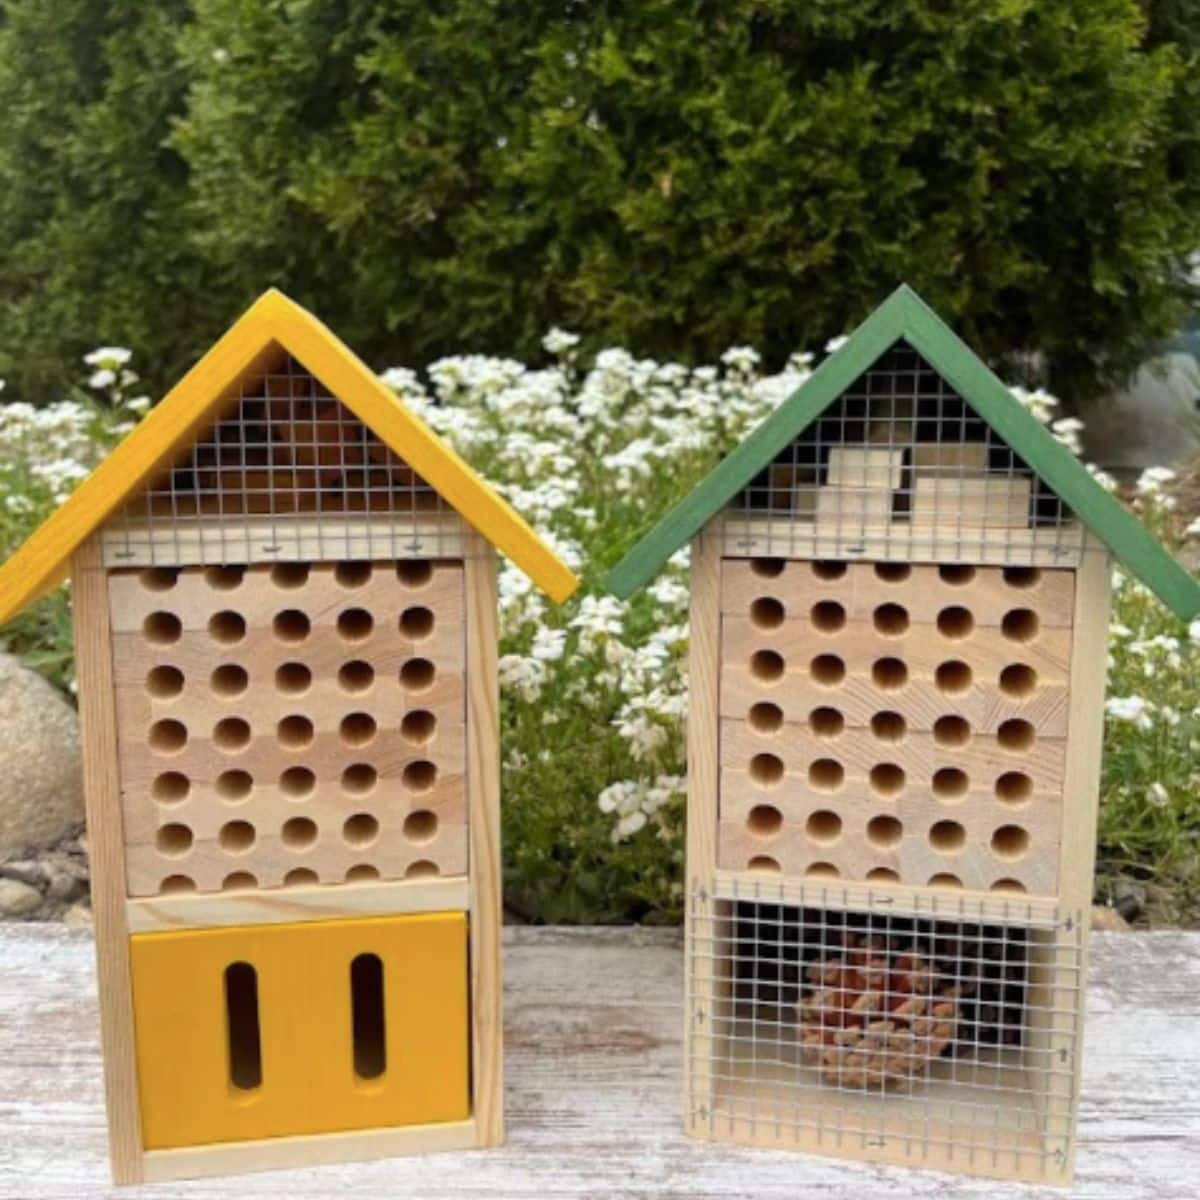 Two Bee houses shown outdoors with wildflowers growing in the background. 